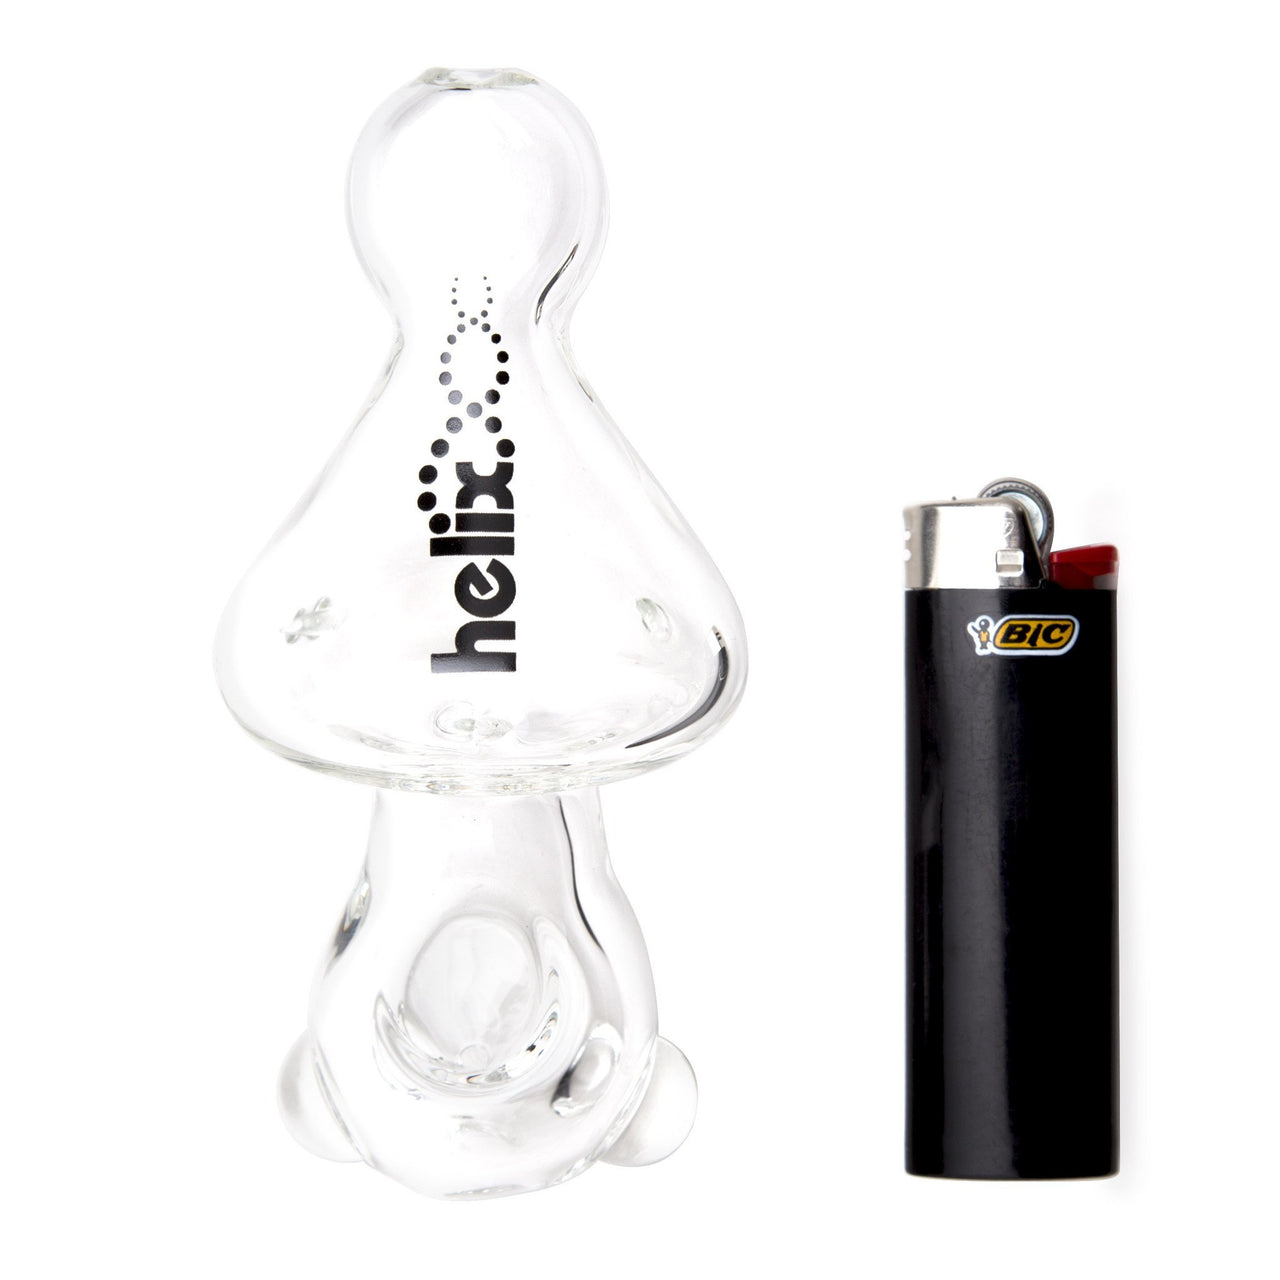 GRAV Helix Classic Mini - 420 Science - The most trusted online smoke shop.